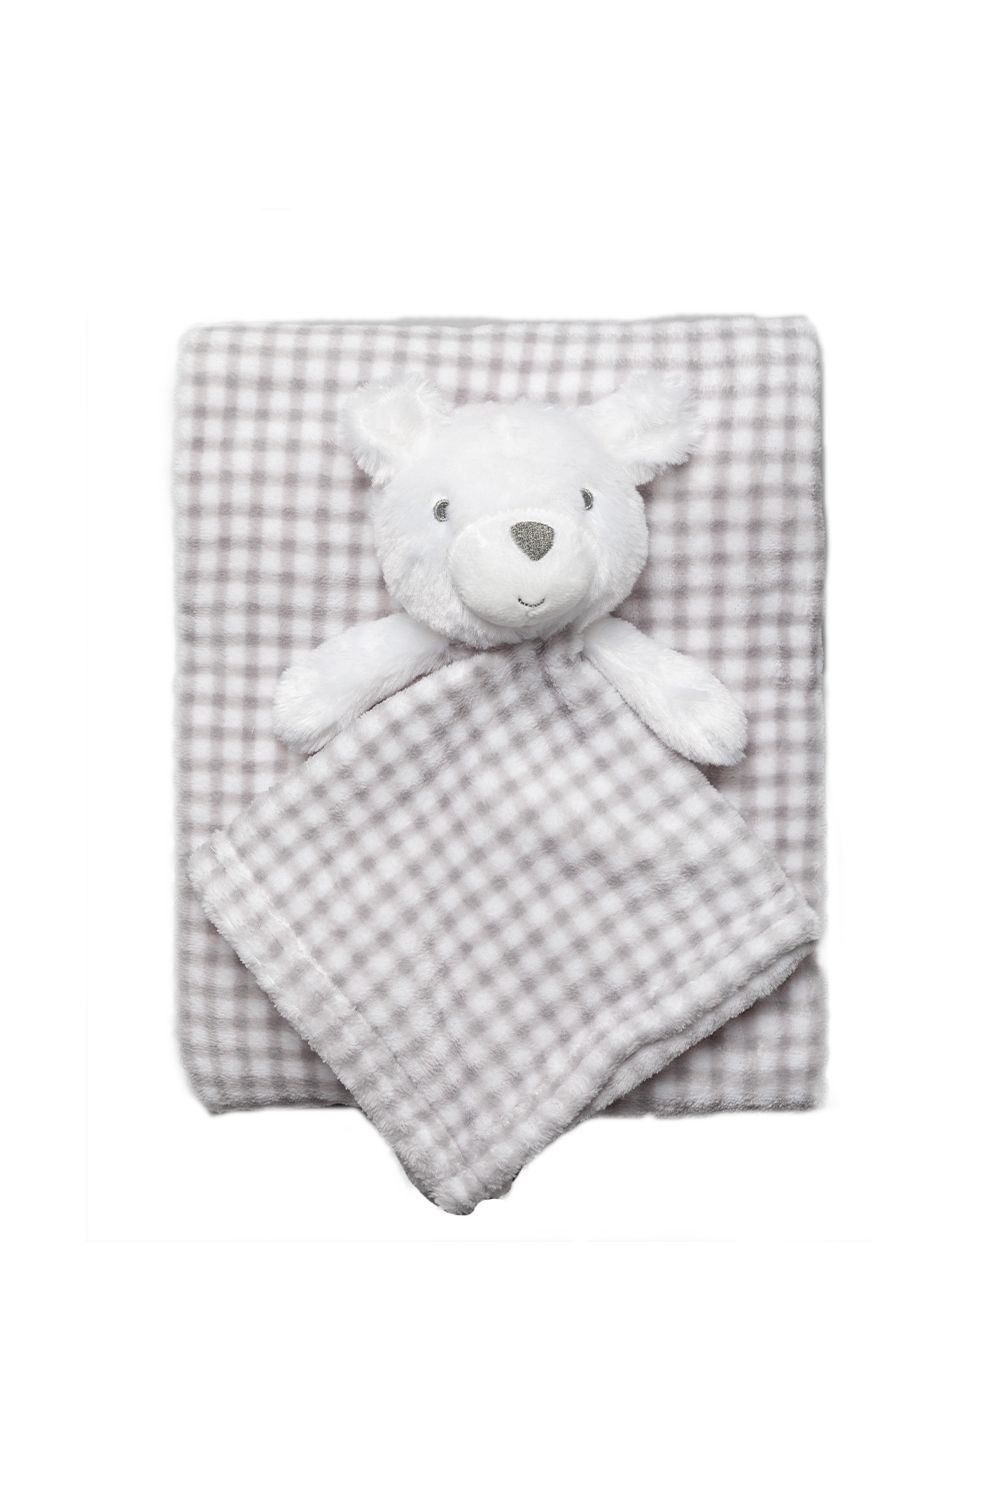 This adorable Snuggle Tots comforter and blanket set make the perfect gift for the little one in your life. The two-piece set features a beautiful, fluffy blanket with gingham print all over, and a comforter with the same print with a cuddly bear toy attached. This set makes a lovely baby shower present.